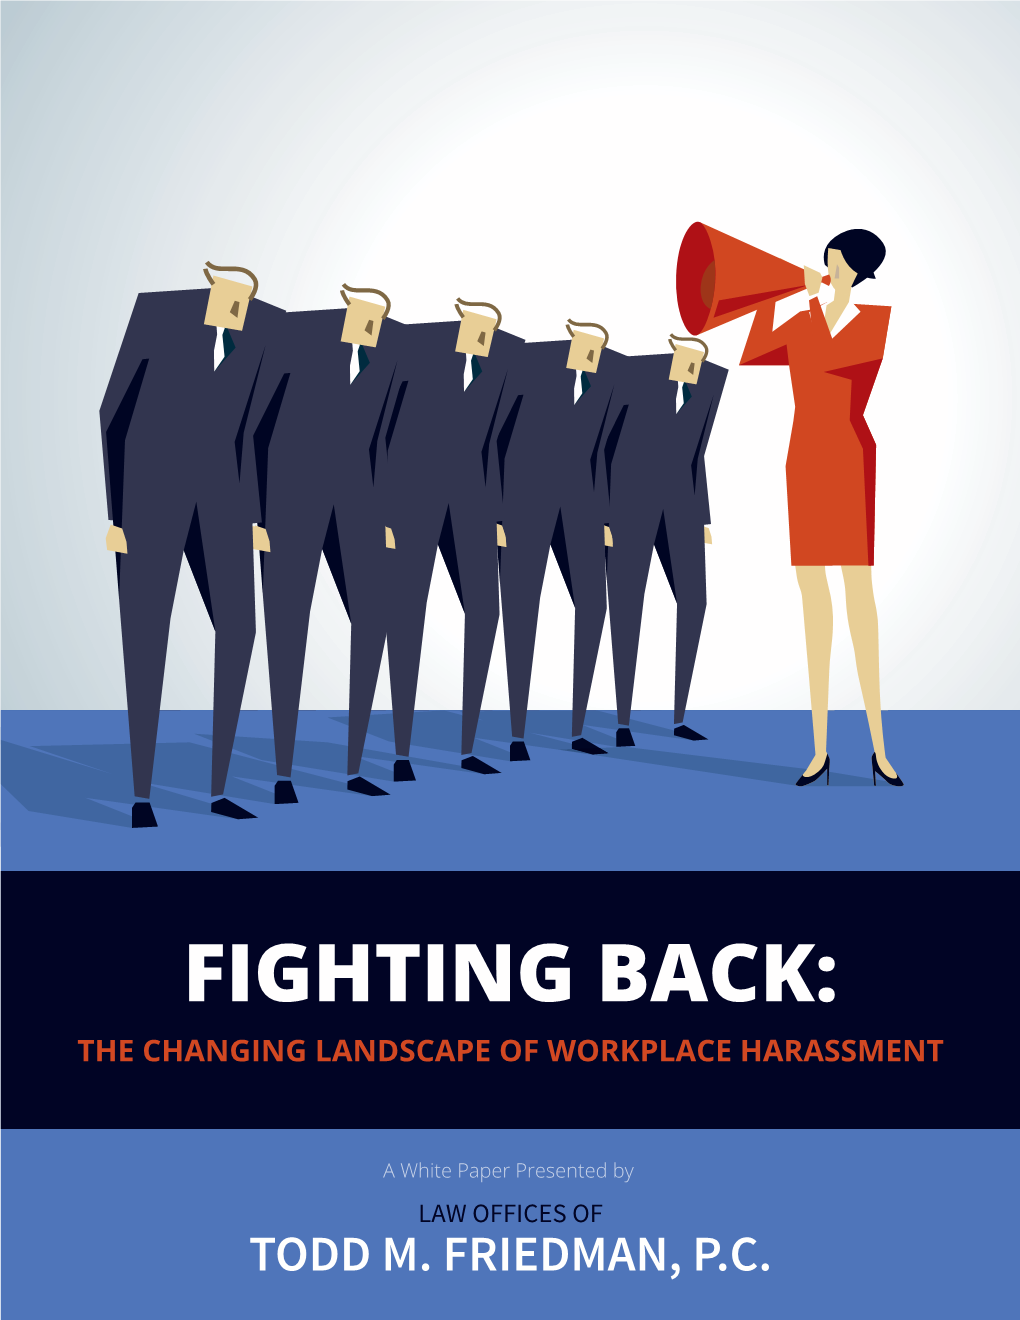 Fighting Back: the Changing Landscape of Workplace Harassment